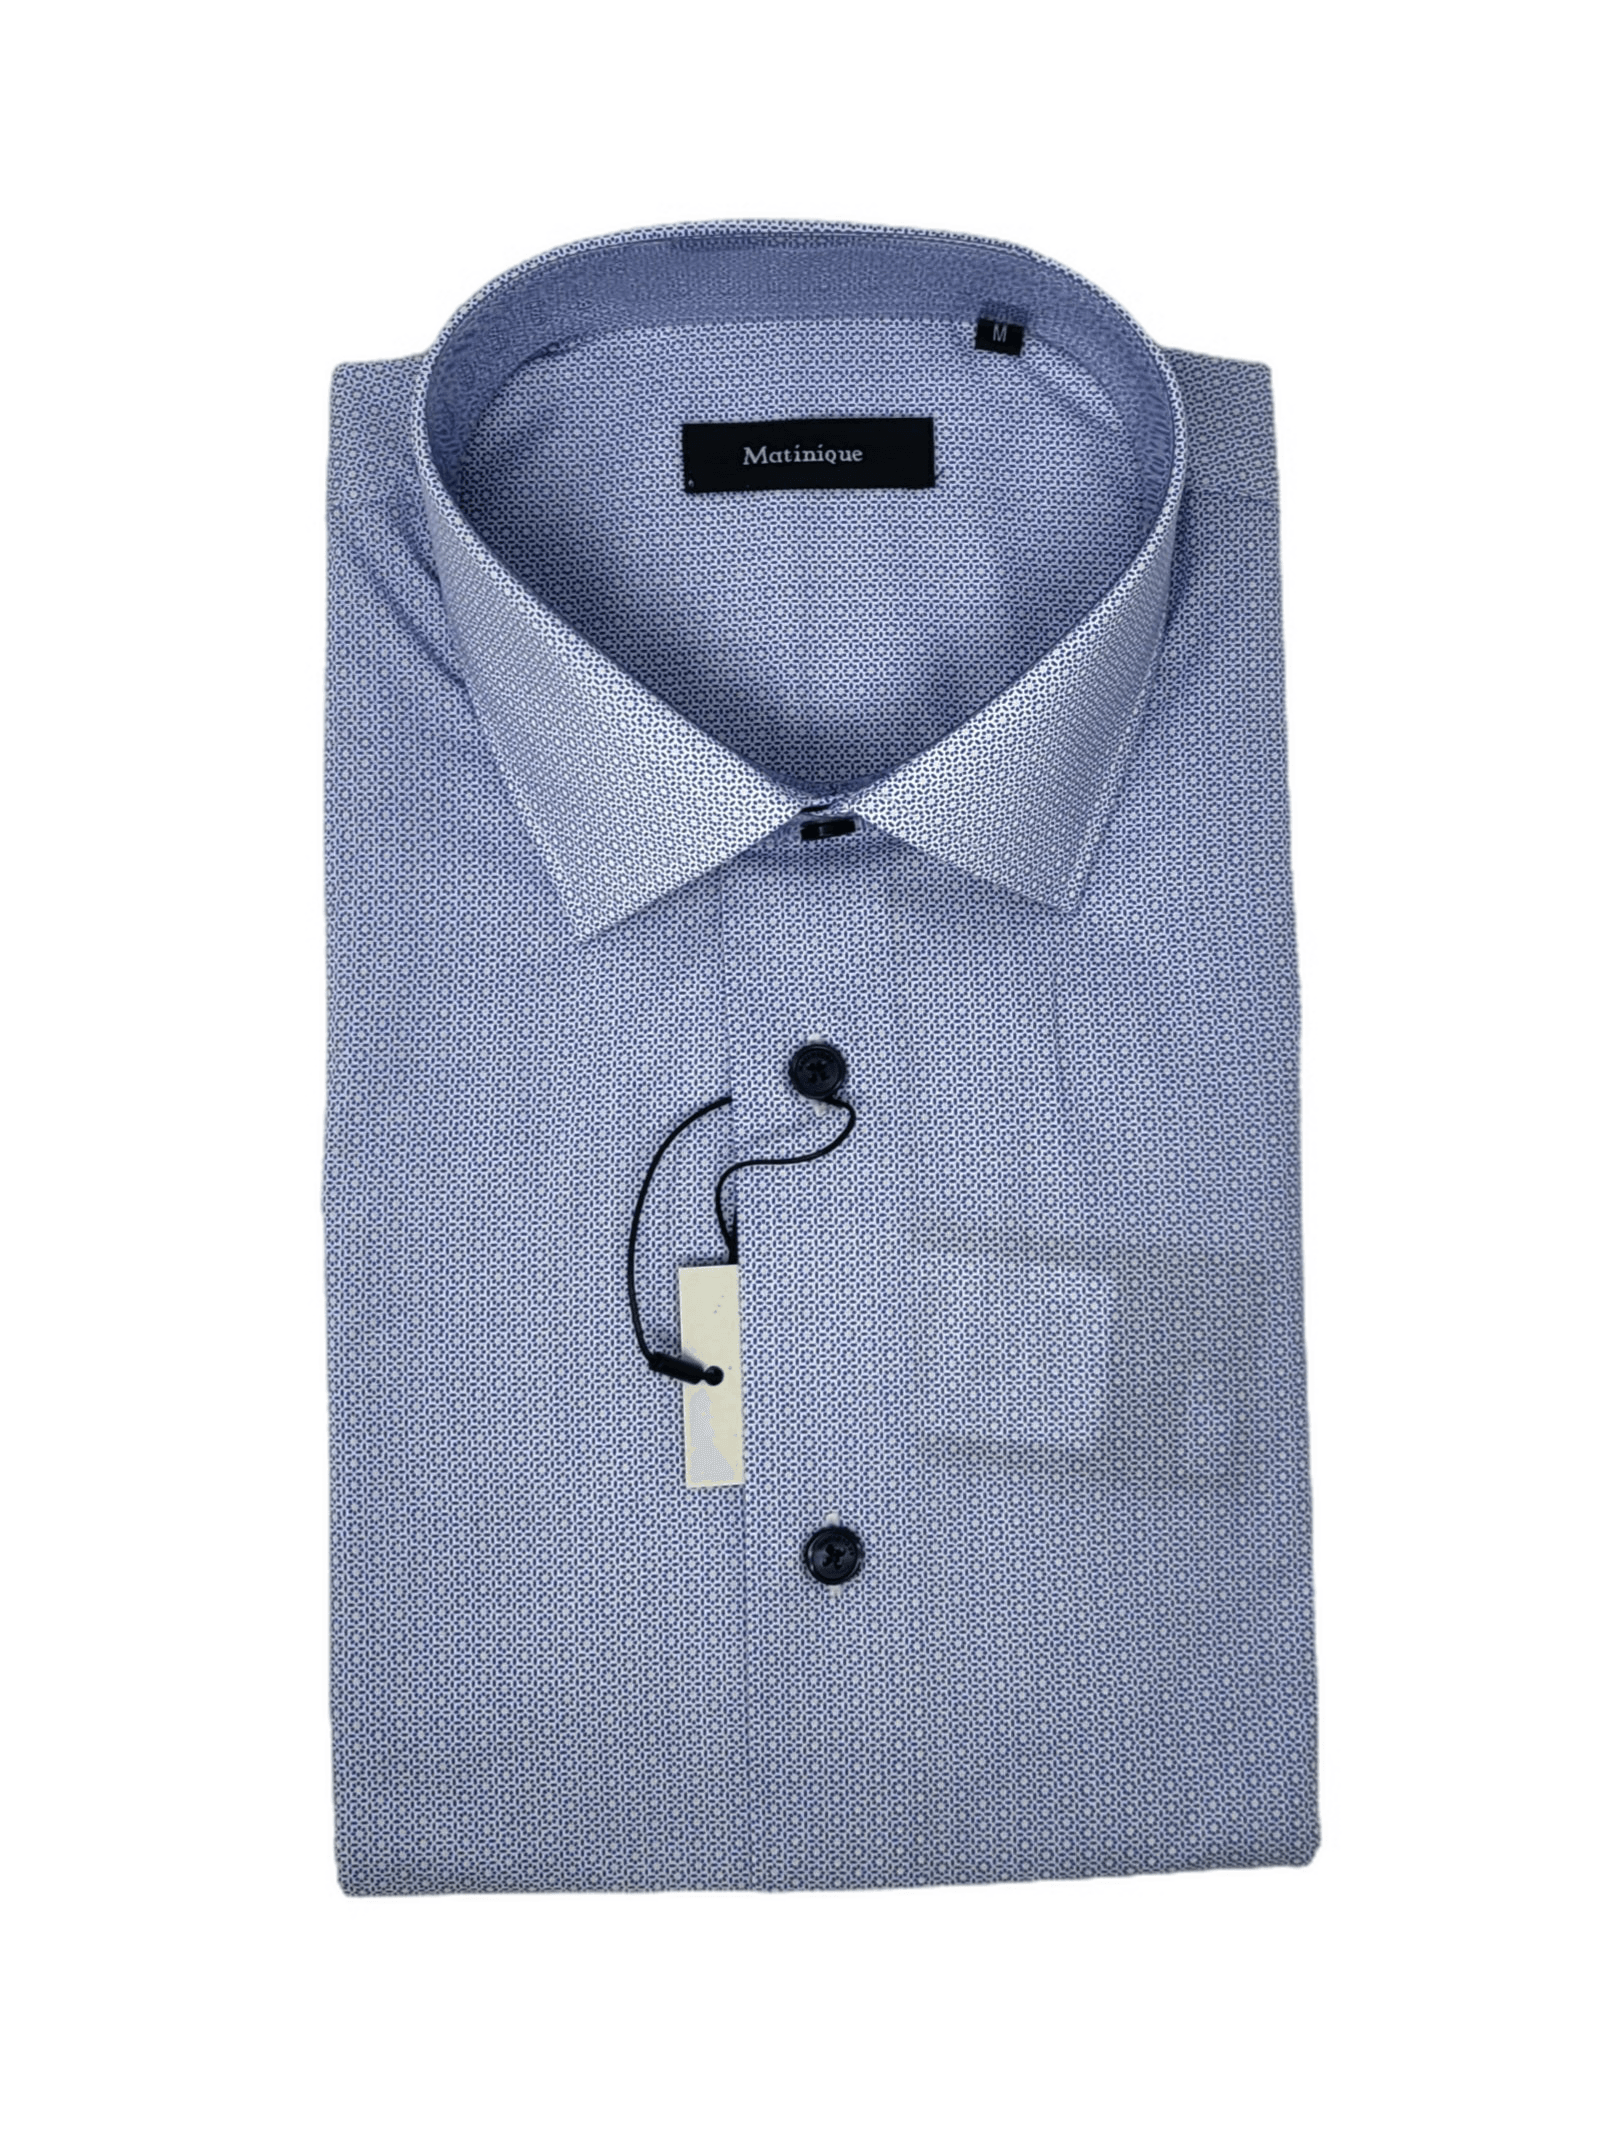 Laflamme- Chemise chambray - Matinique